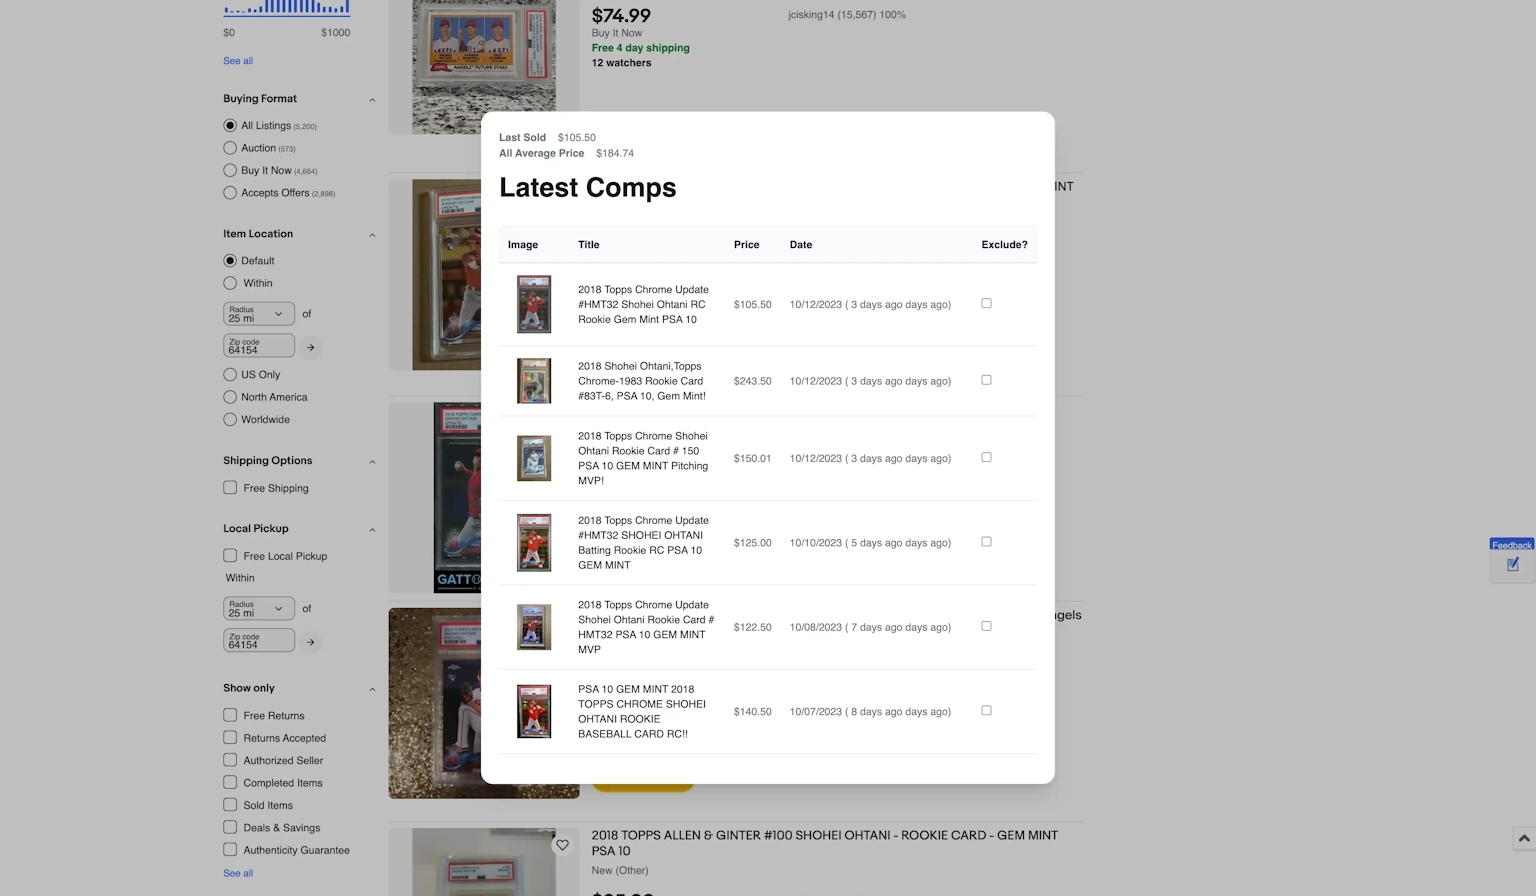 figoca on ebay list page - deal indicator clicked